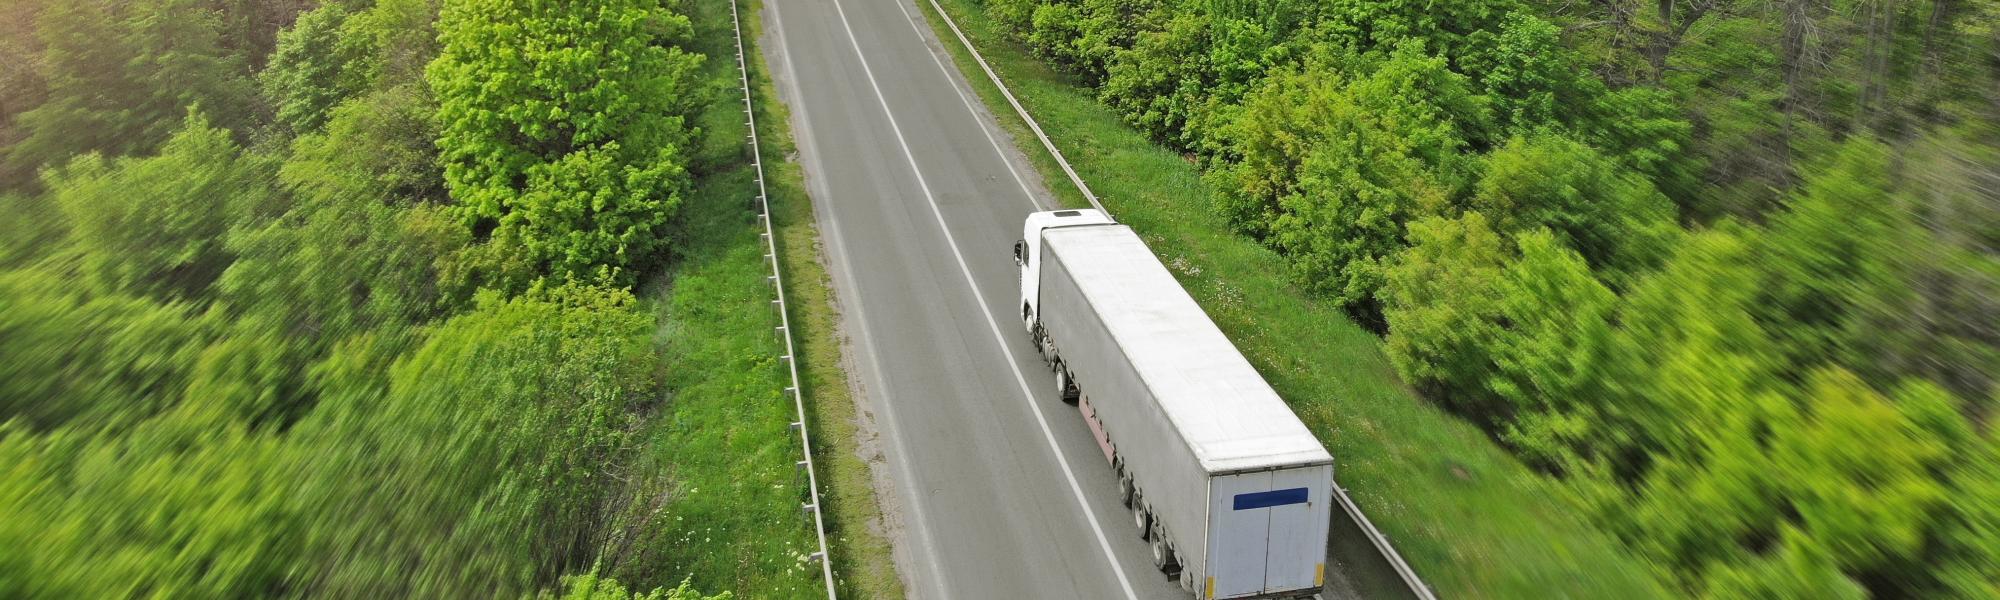 EU environment committee backs mixed deal on heavy vehicle CO₂ standards 